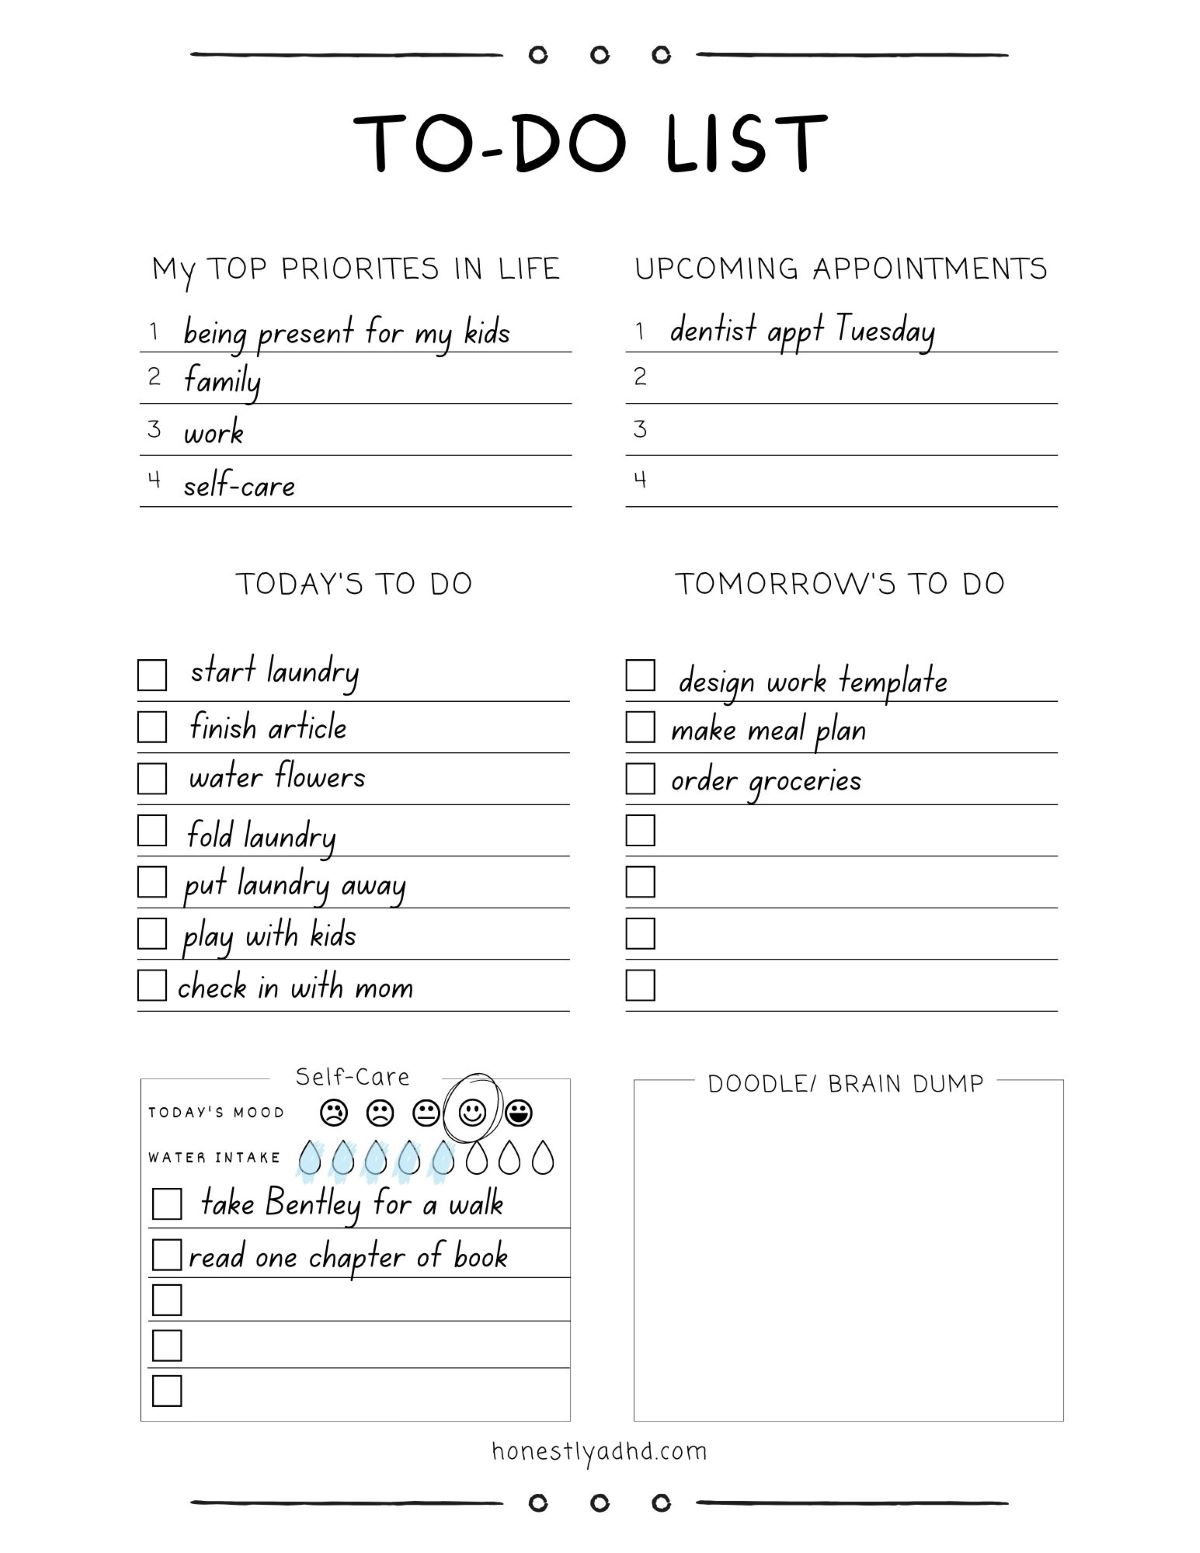 A simple free ADHD to do list filled out with example text.